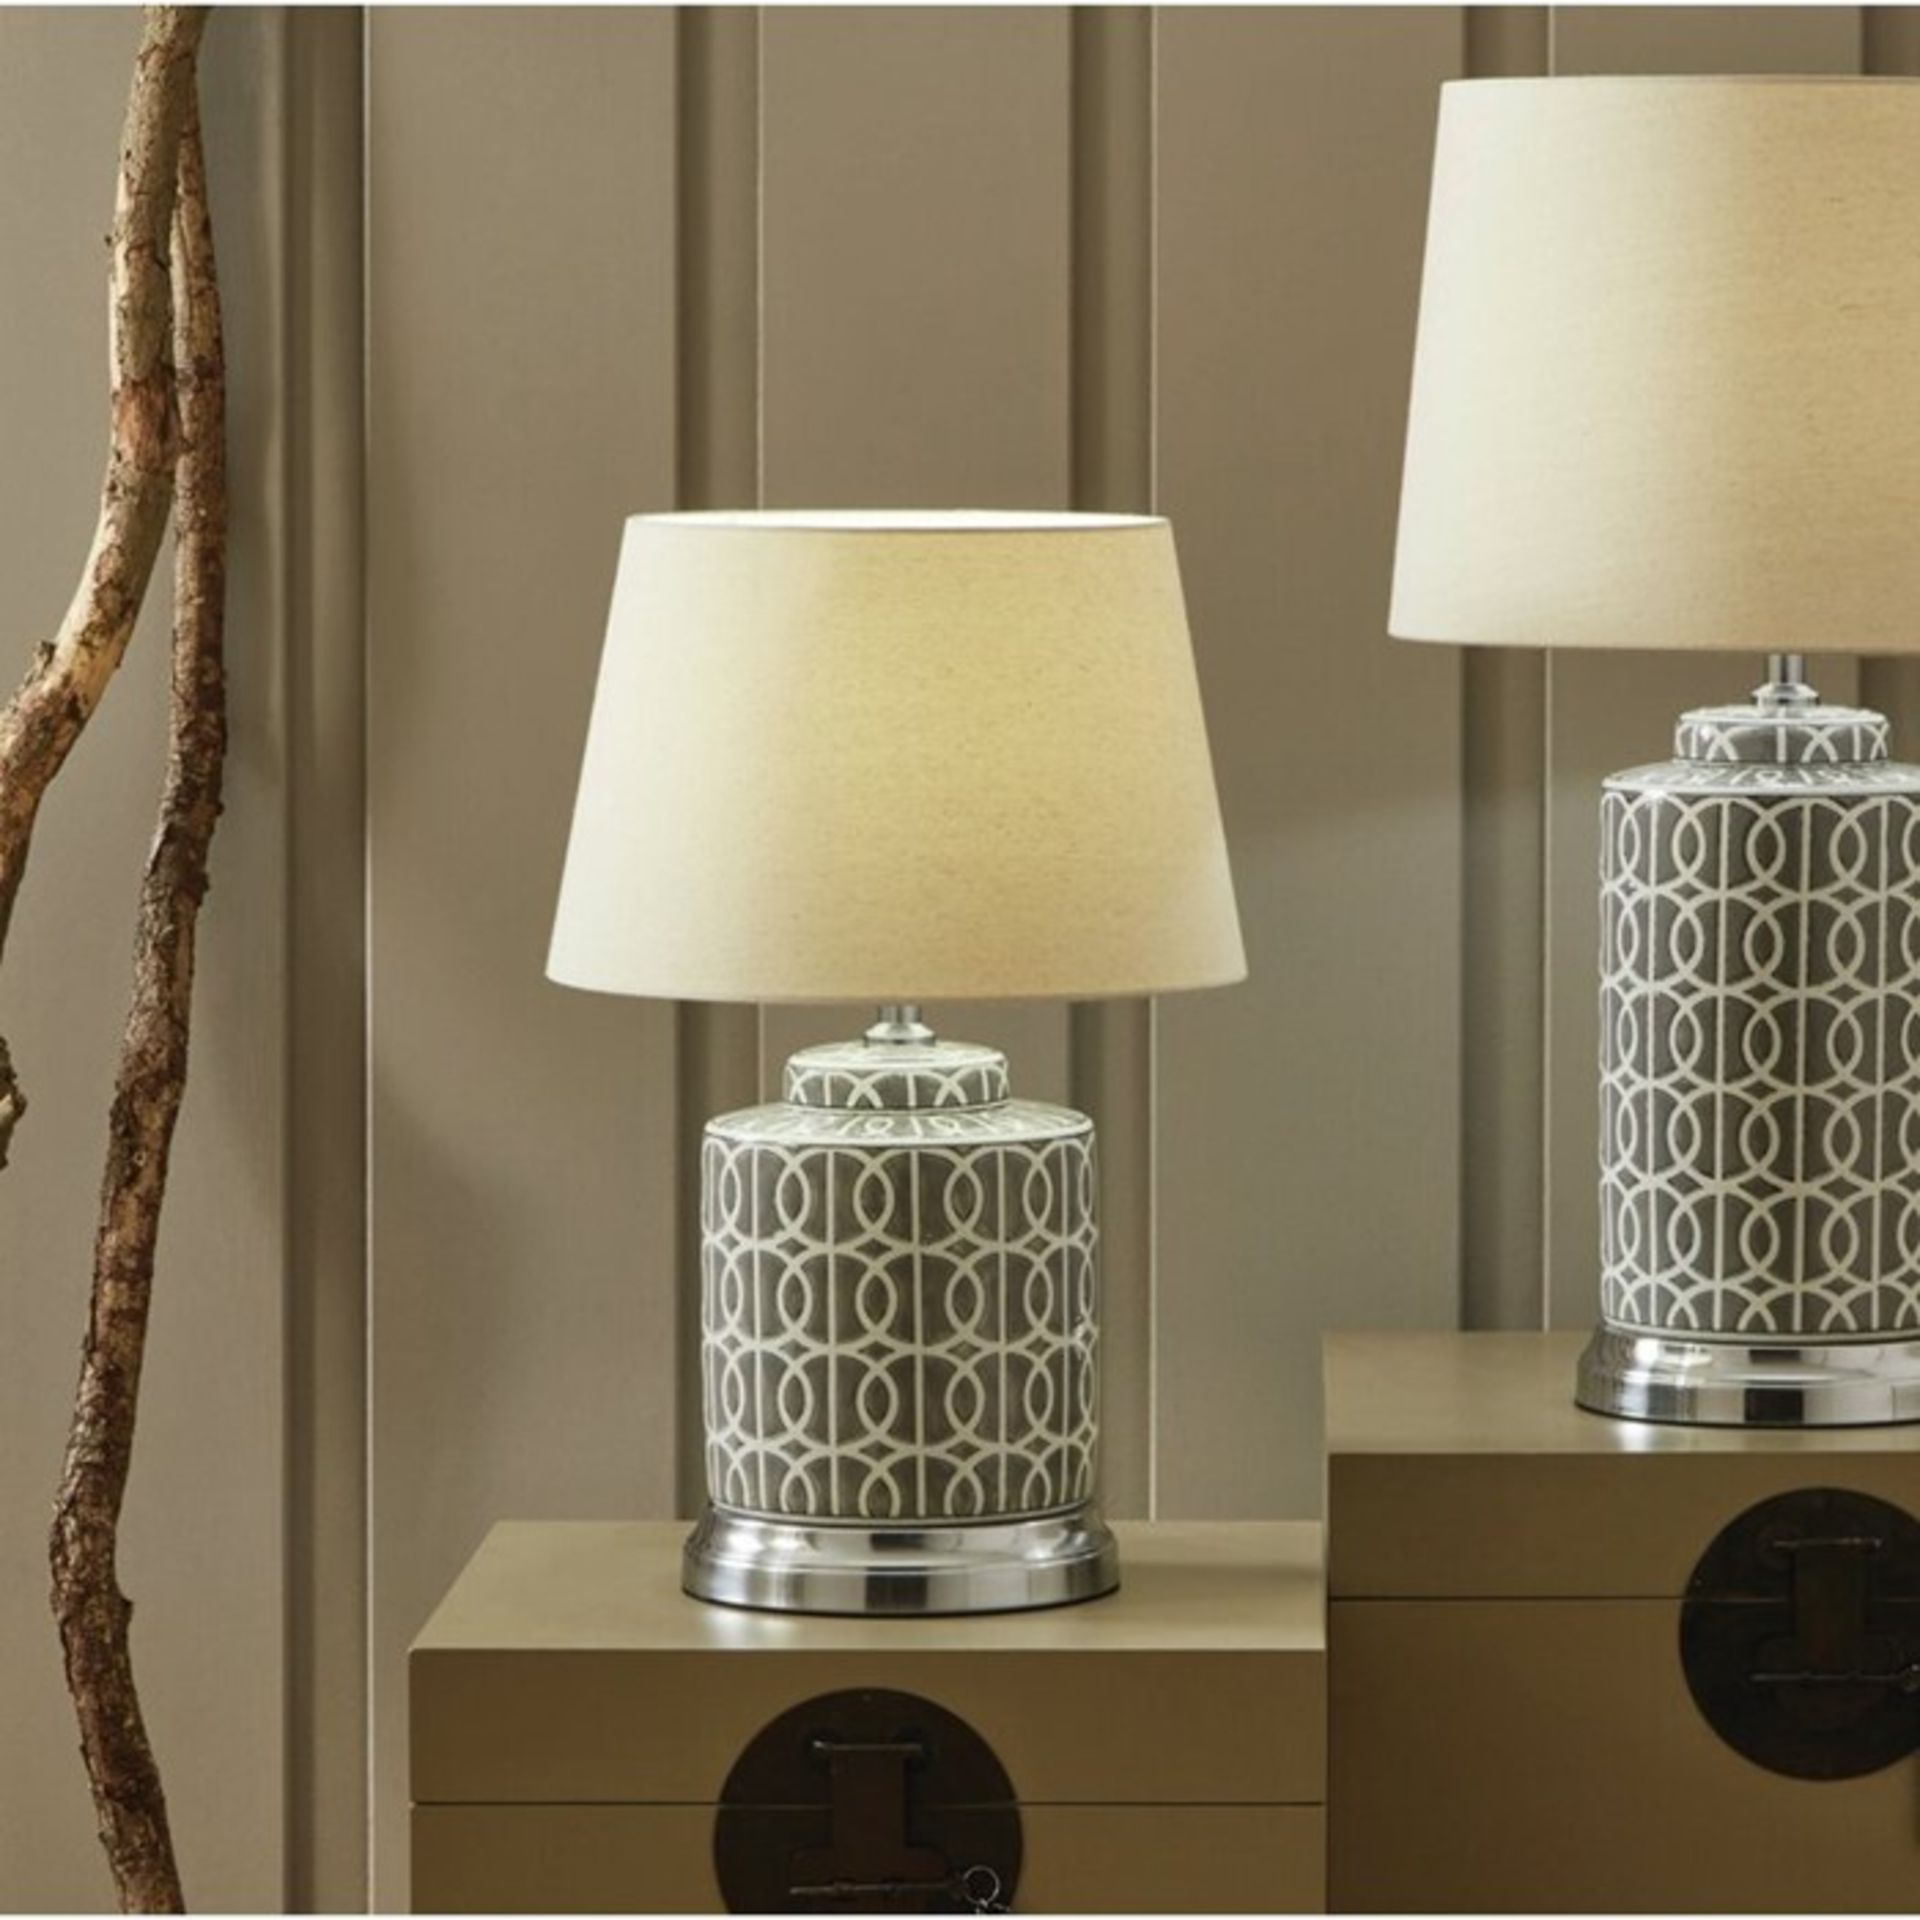 Marlow Home Co., Albin 72cm Table Lamp (NO SHADE) - RRP £132.99 (PACH7549 - 17491/16) 2E